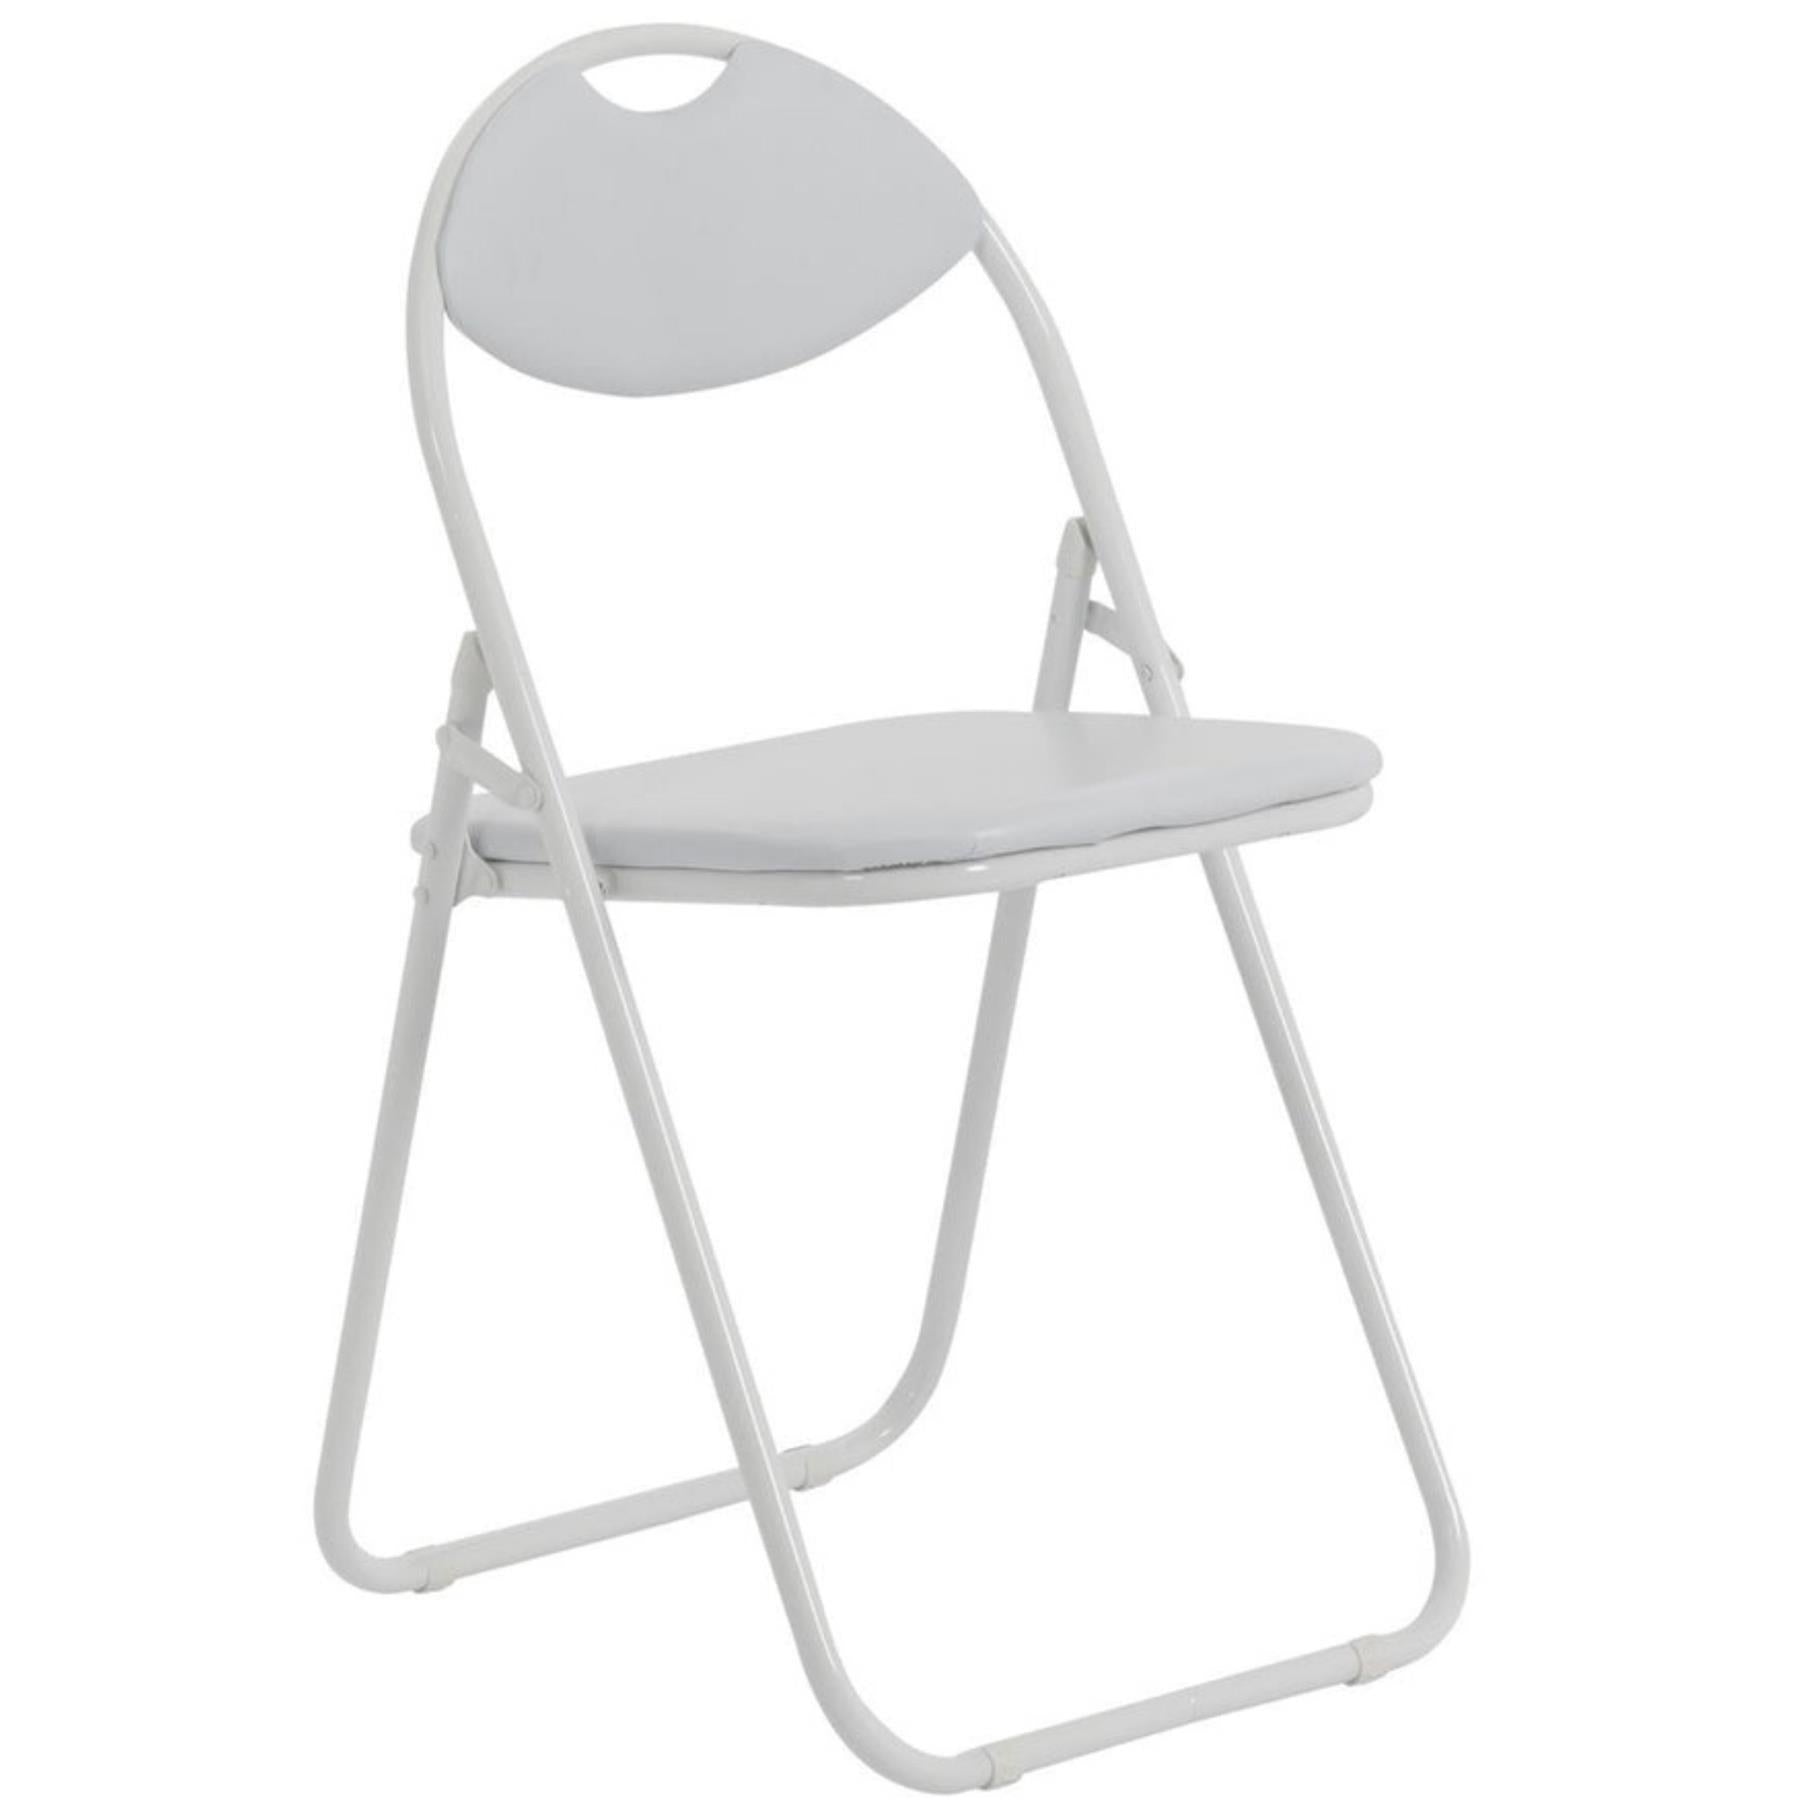 Versatile Metal Folding Chairs Indoor, Desk Chairs for Bedrooms, Offices, Chairs for Small Spaces